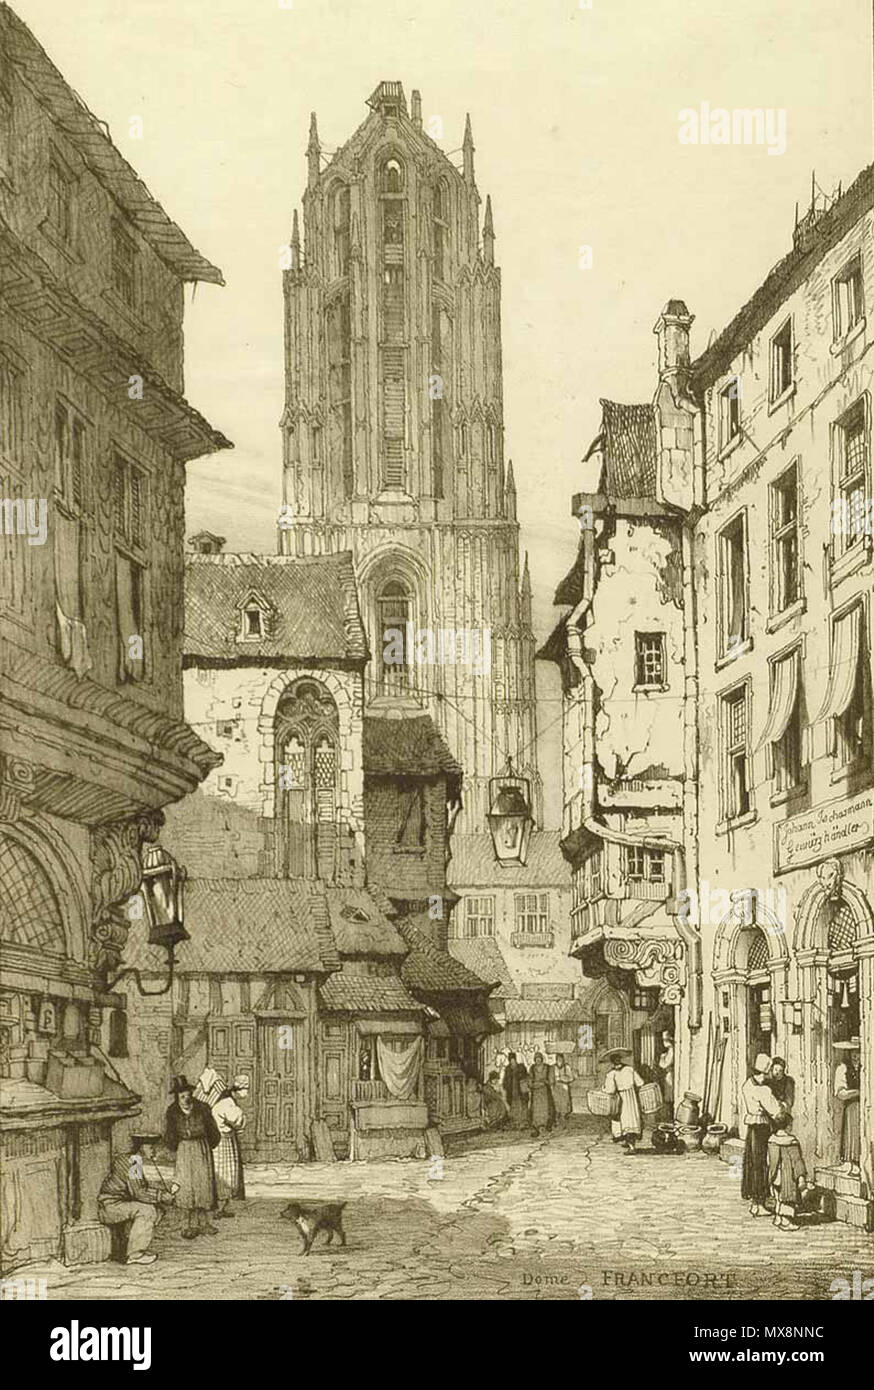 . 'Dome Francfort'. Lithograph by S. Prout, c. 1850. circa 1850. Template:Samel Prout 218 Frankfurt Dom 19 Jh Stock Photo